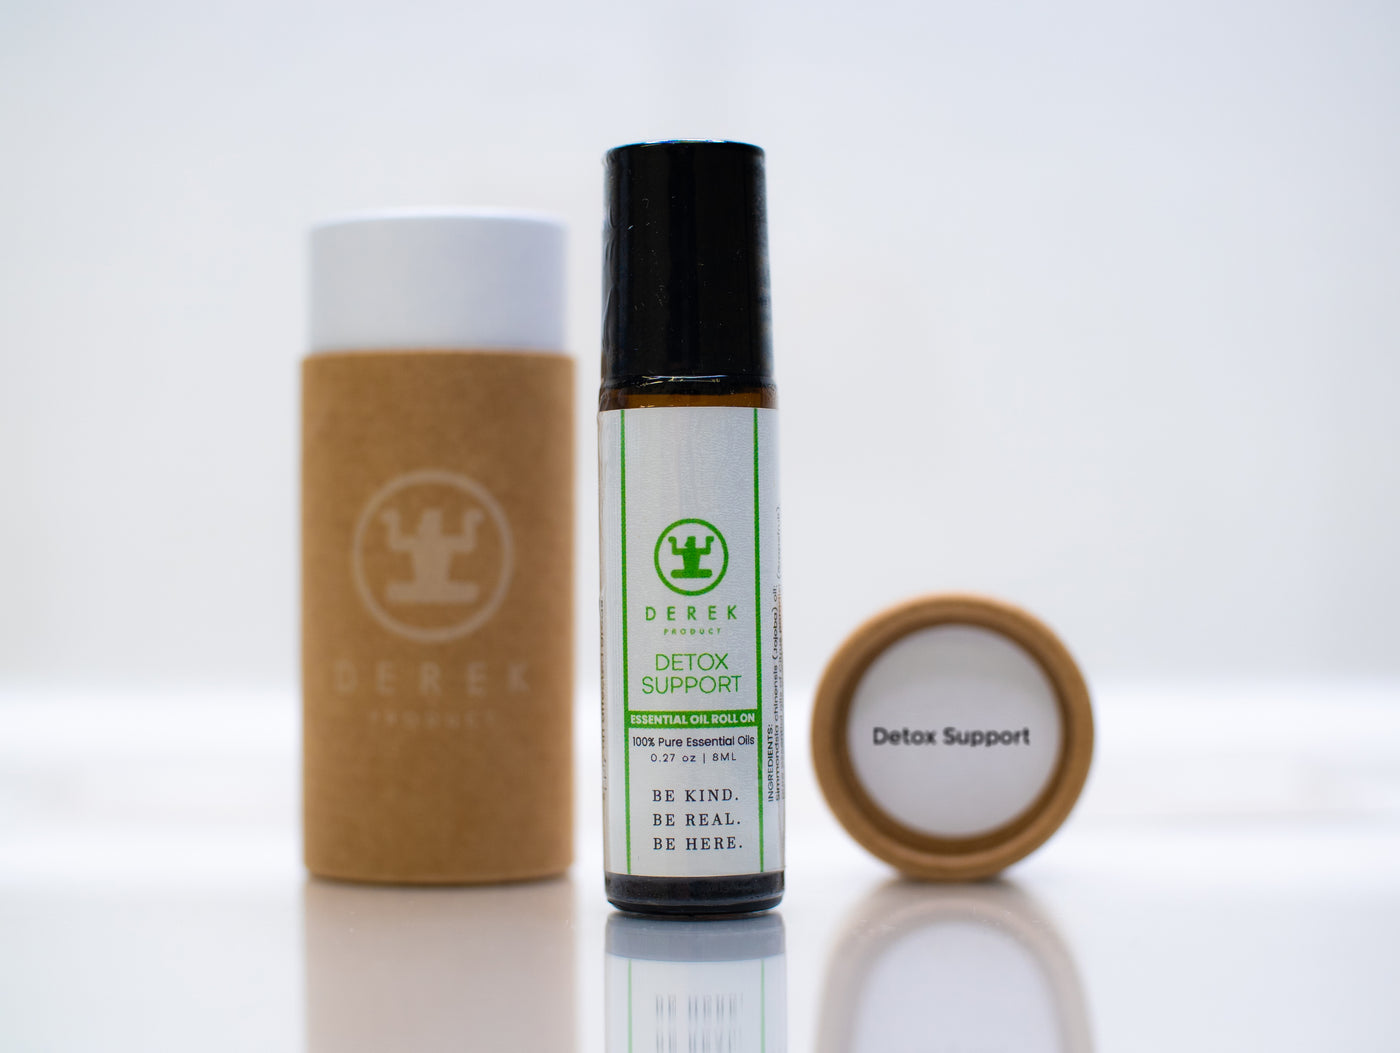 Derek Product - Detox Support Natural Essential Oil Roll On for Aromatherapy and Relaxation | Wellness Support | 8ML - DerekProduct